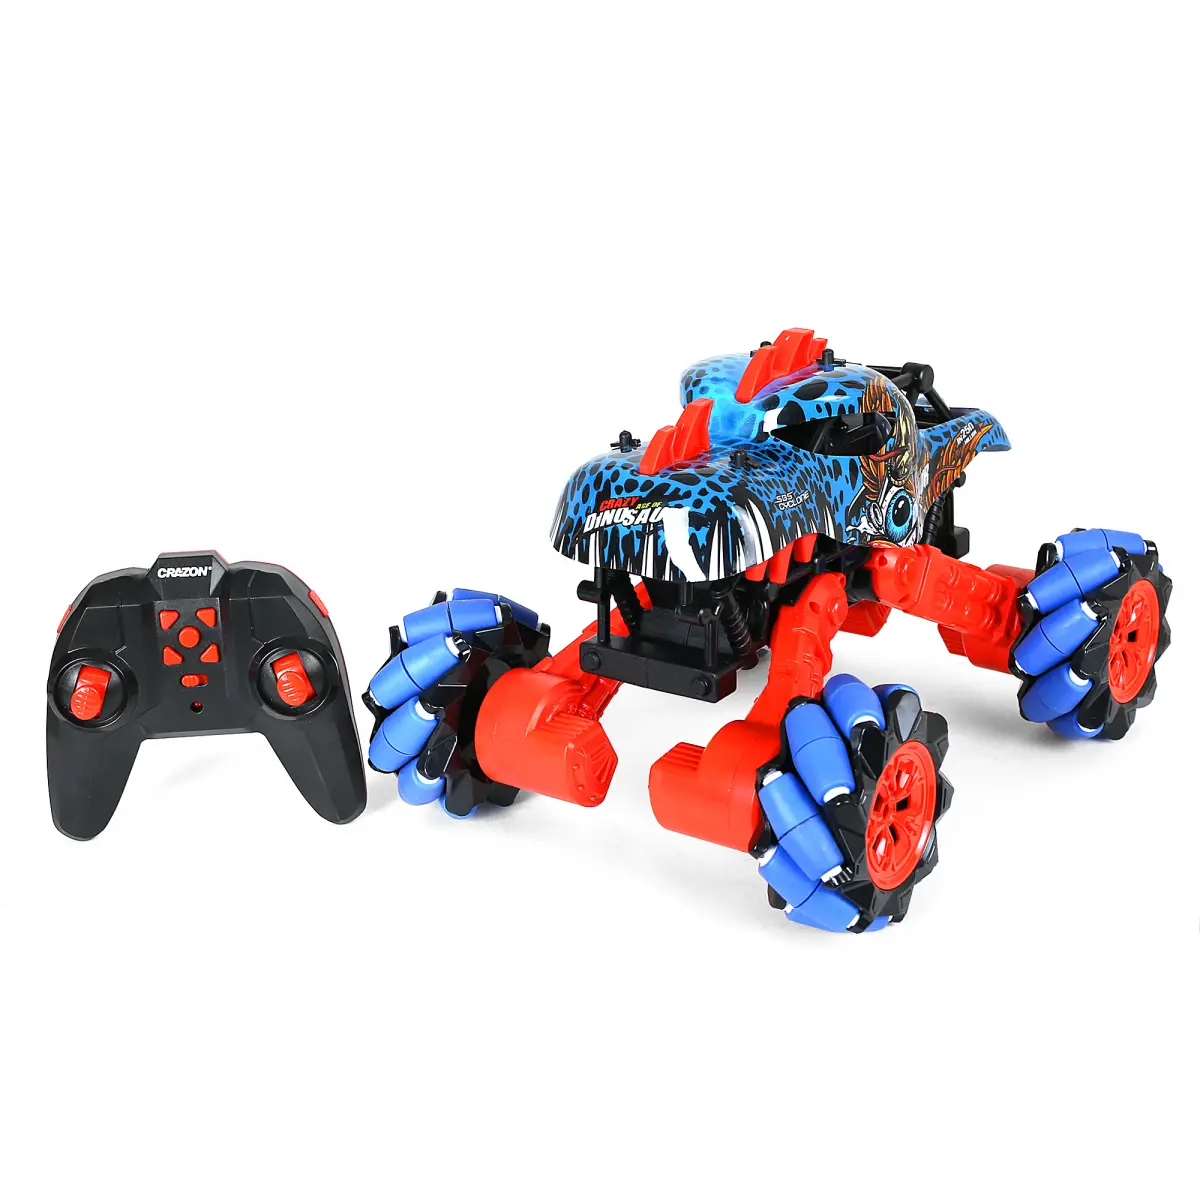 Ralleyz Drifting Crossroad Beast Remote Control Toys for Kids, 4Y, Red